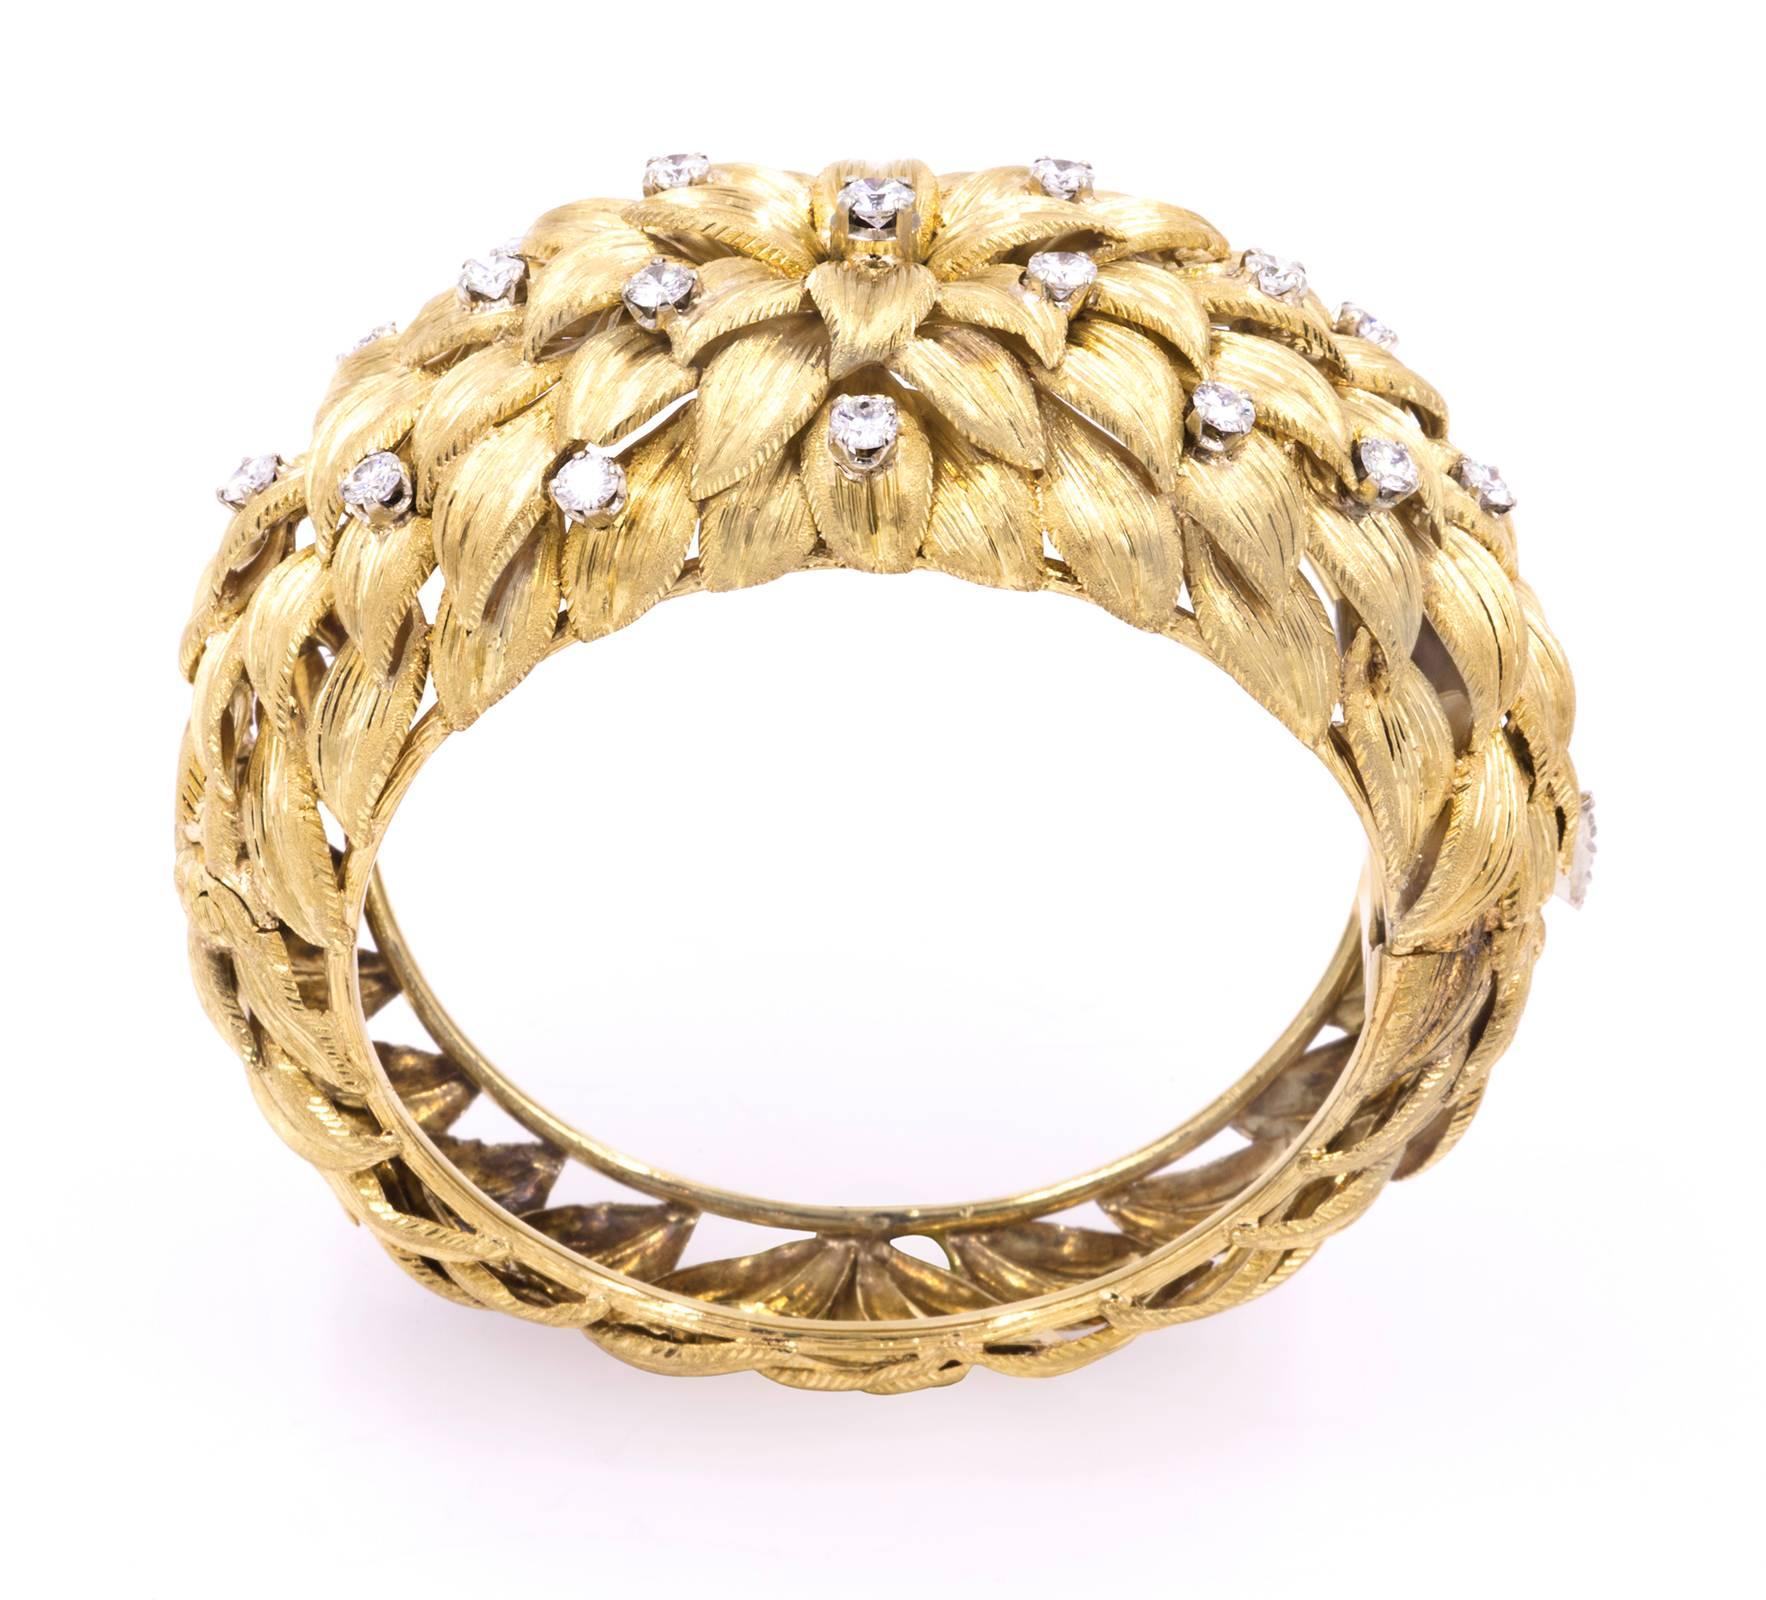 Large dramatic showstopper!  18k gold bracelet.  Hinge clip on, Decorative chrysanthemum petal design, sprinkled with 19 sparkling diamonds.  Total of 3.13ct of diamonds. VS1 color White. Total weight, 105.56 g.
